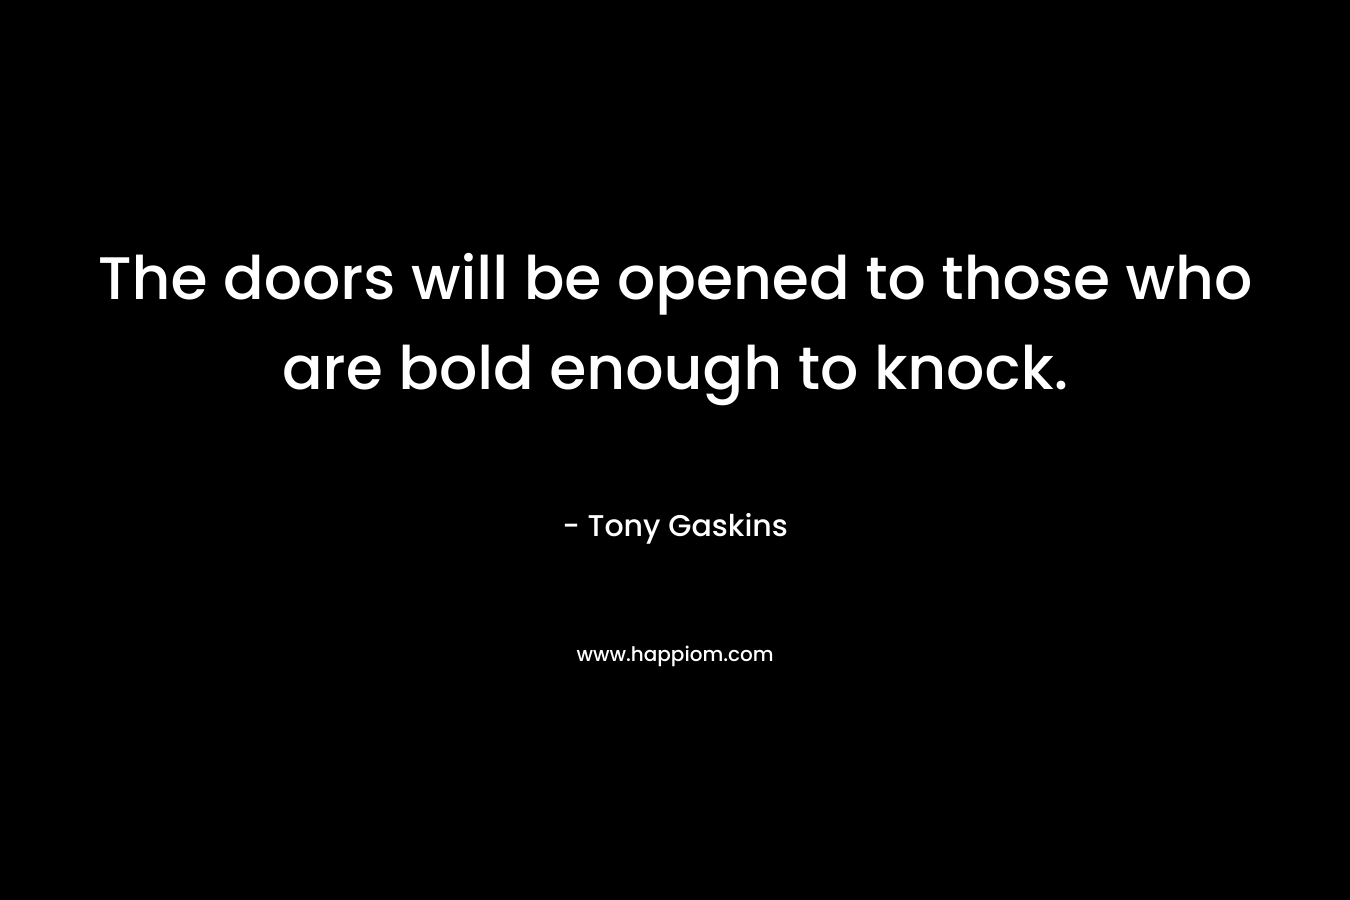 The doors will be opened to those who are bold enough to knock. – Tony Gaskins